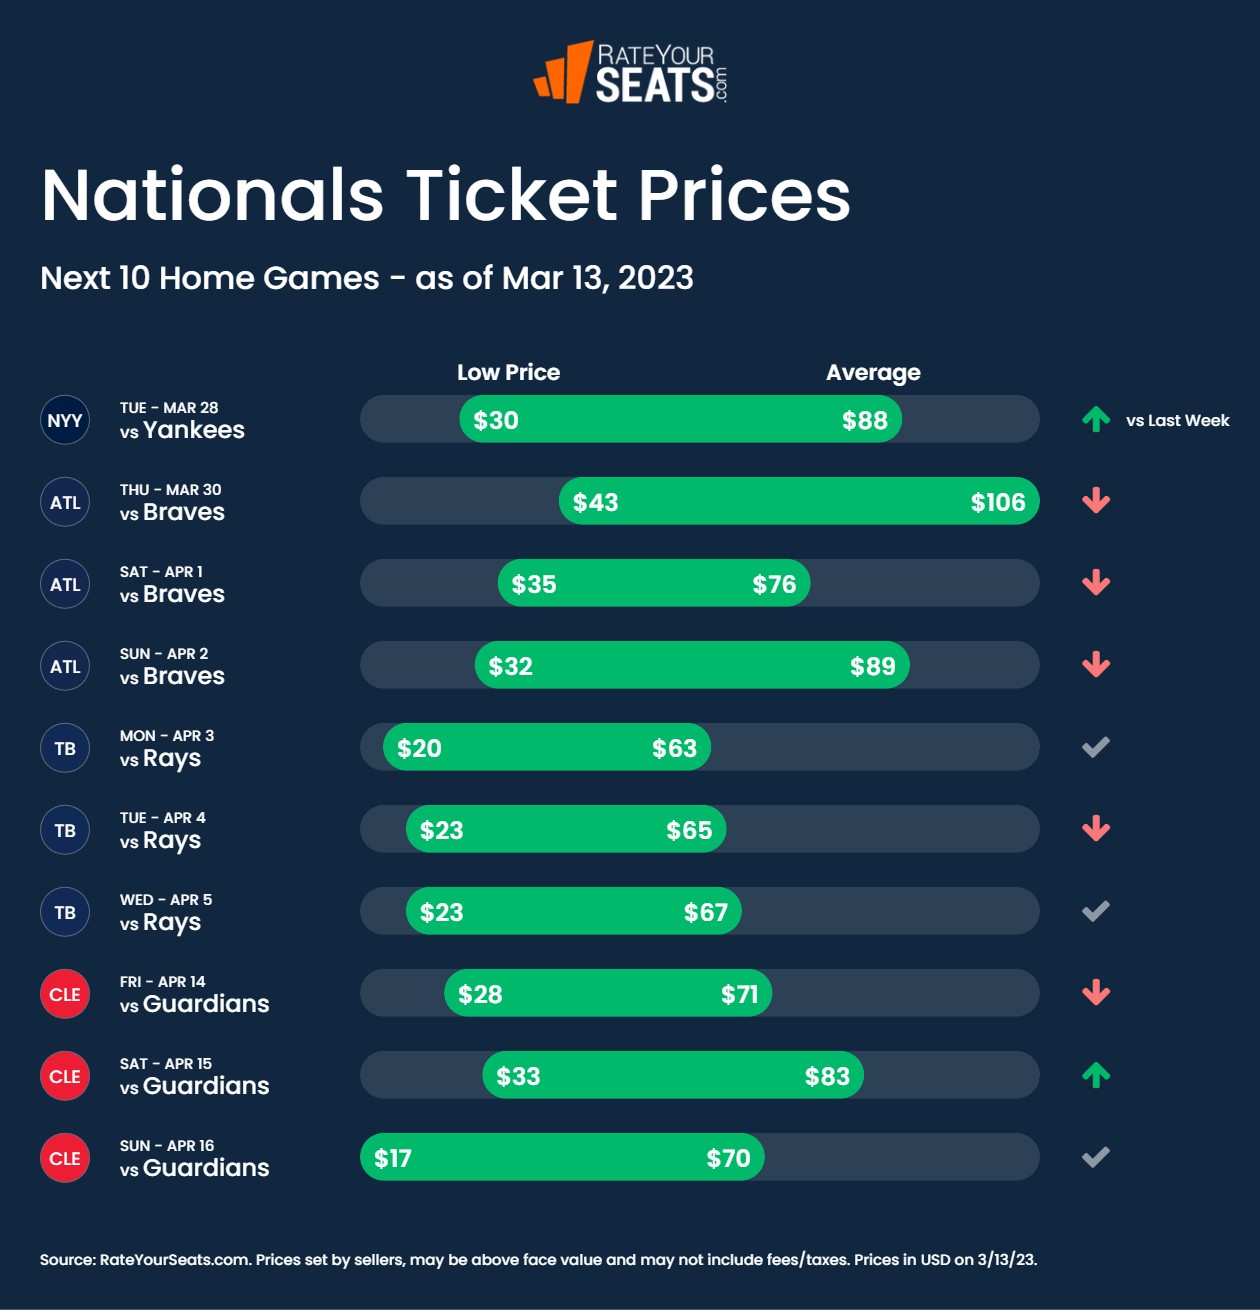 Nationals tickets pricing week of March 13 2023